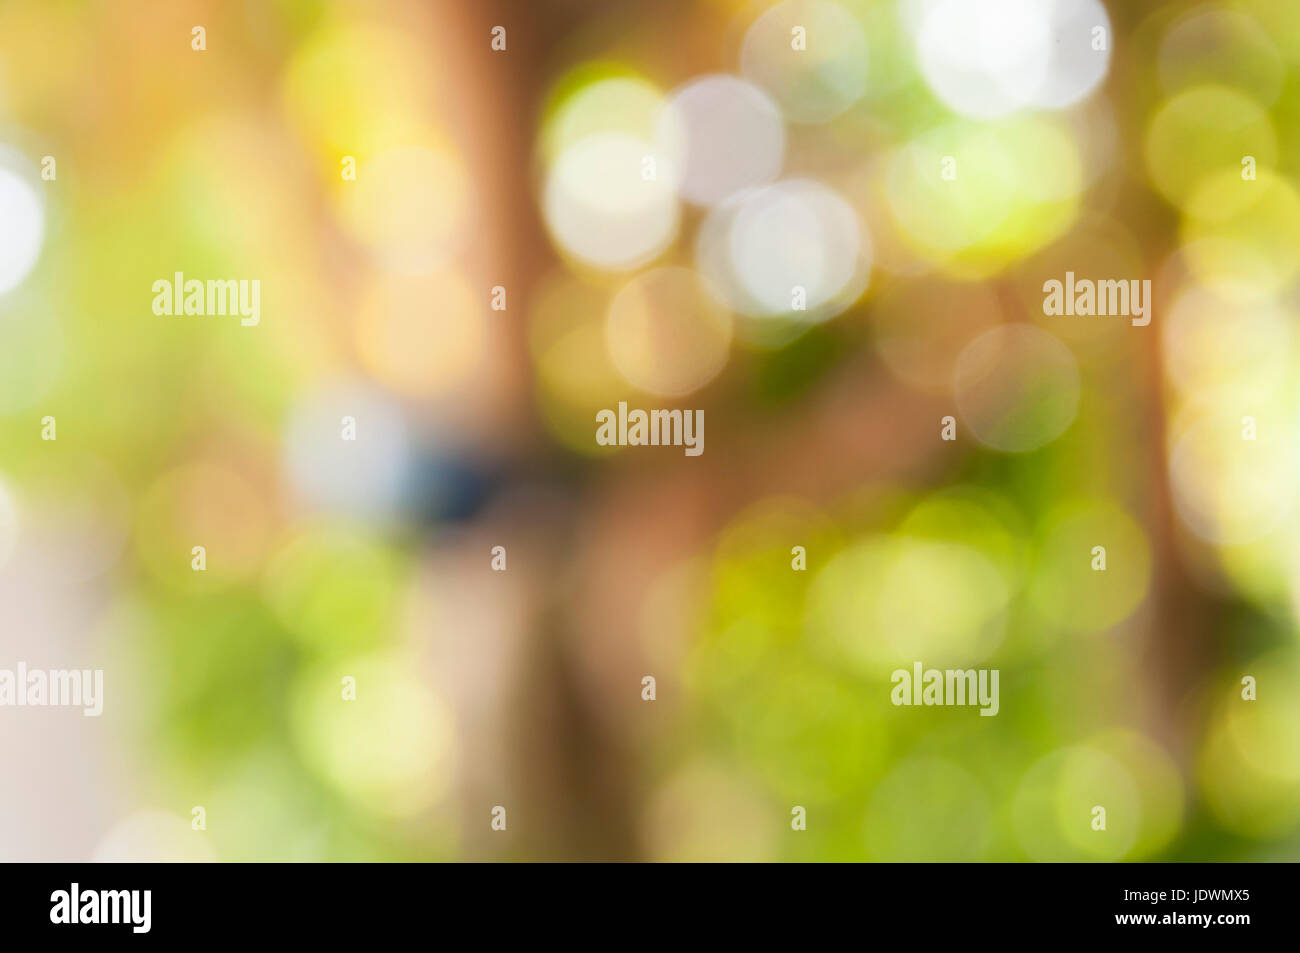 blurred of fresh healthy green bio background with abstract blurred foliage and bright summer sunlight Stock Photo